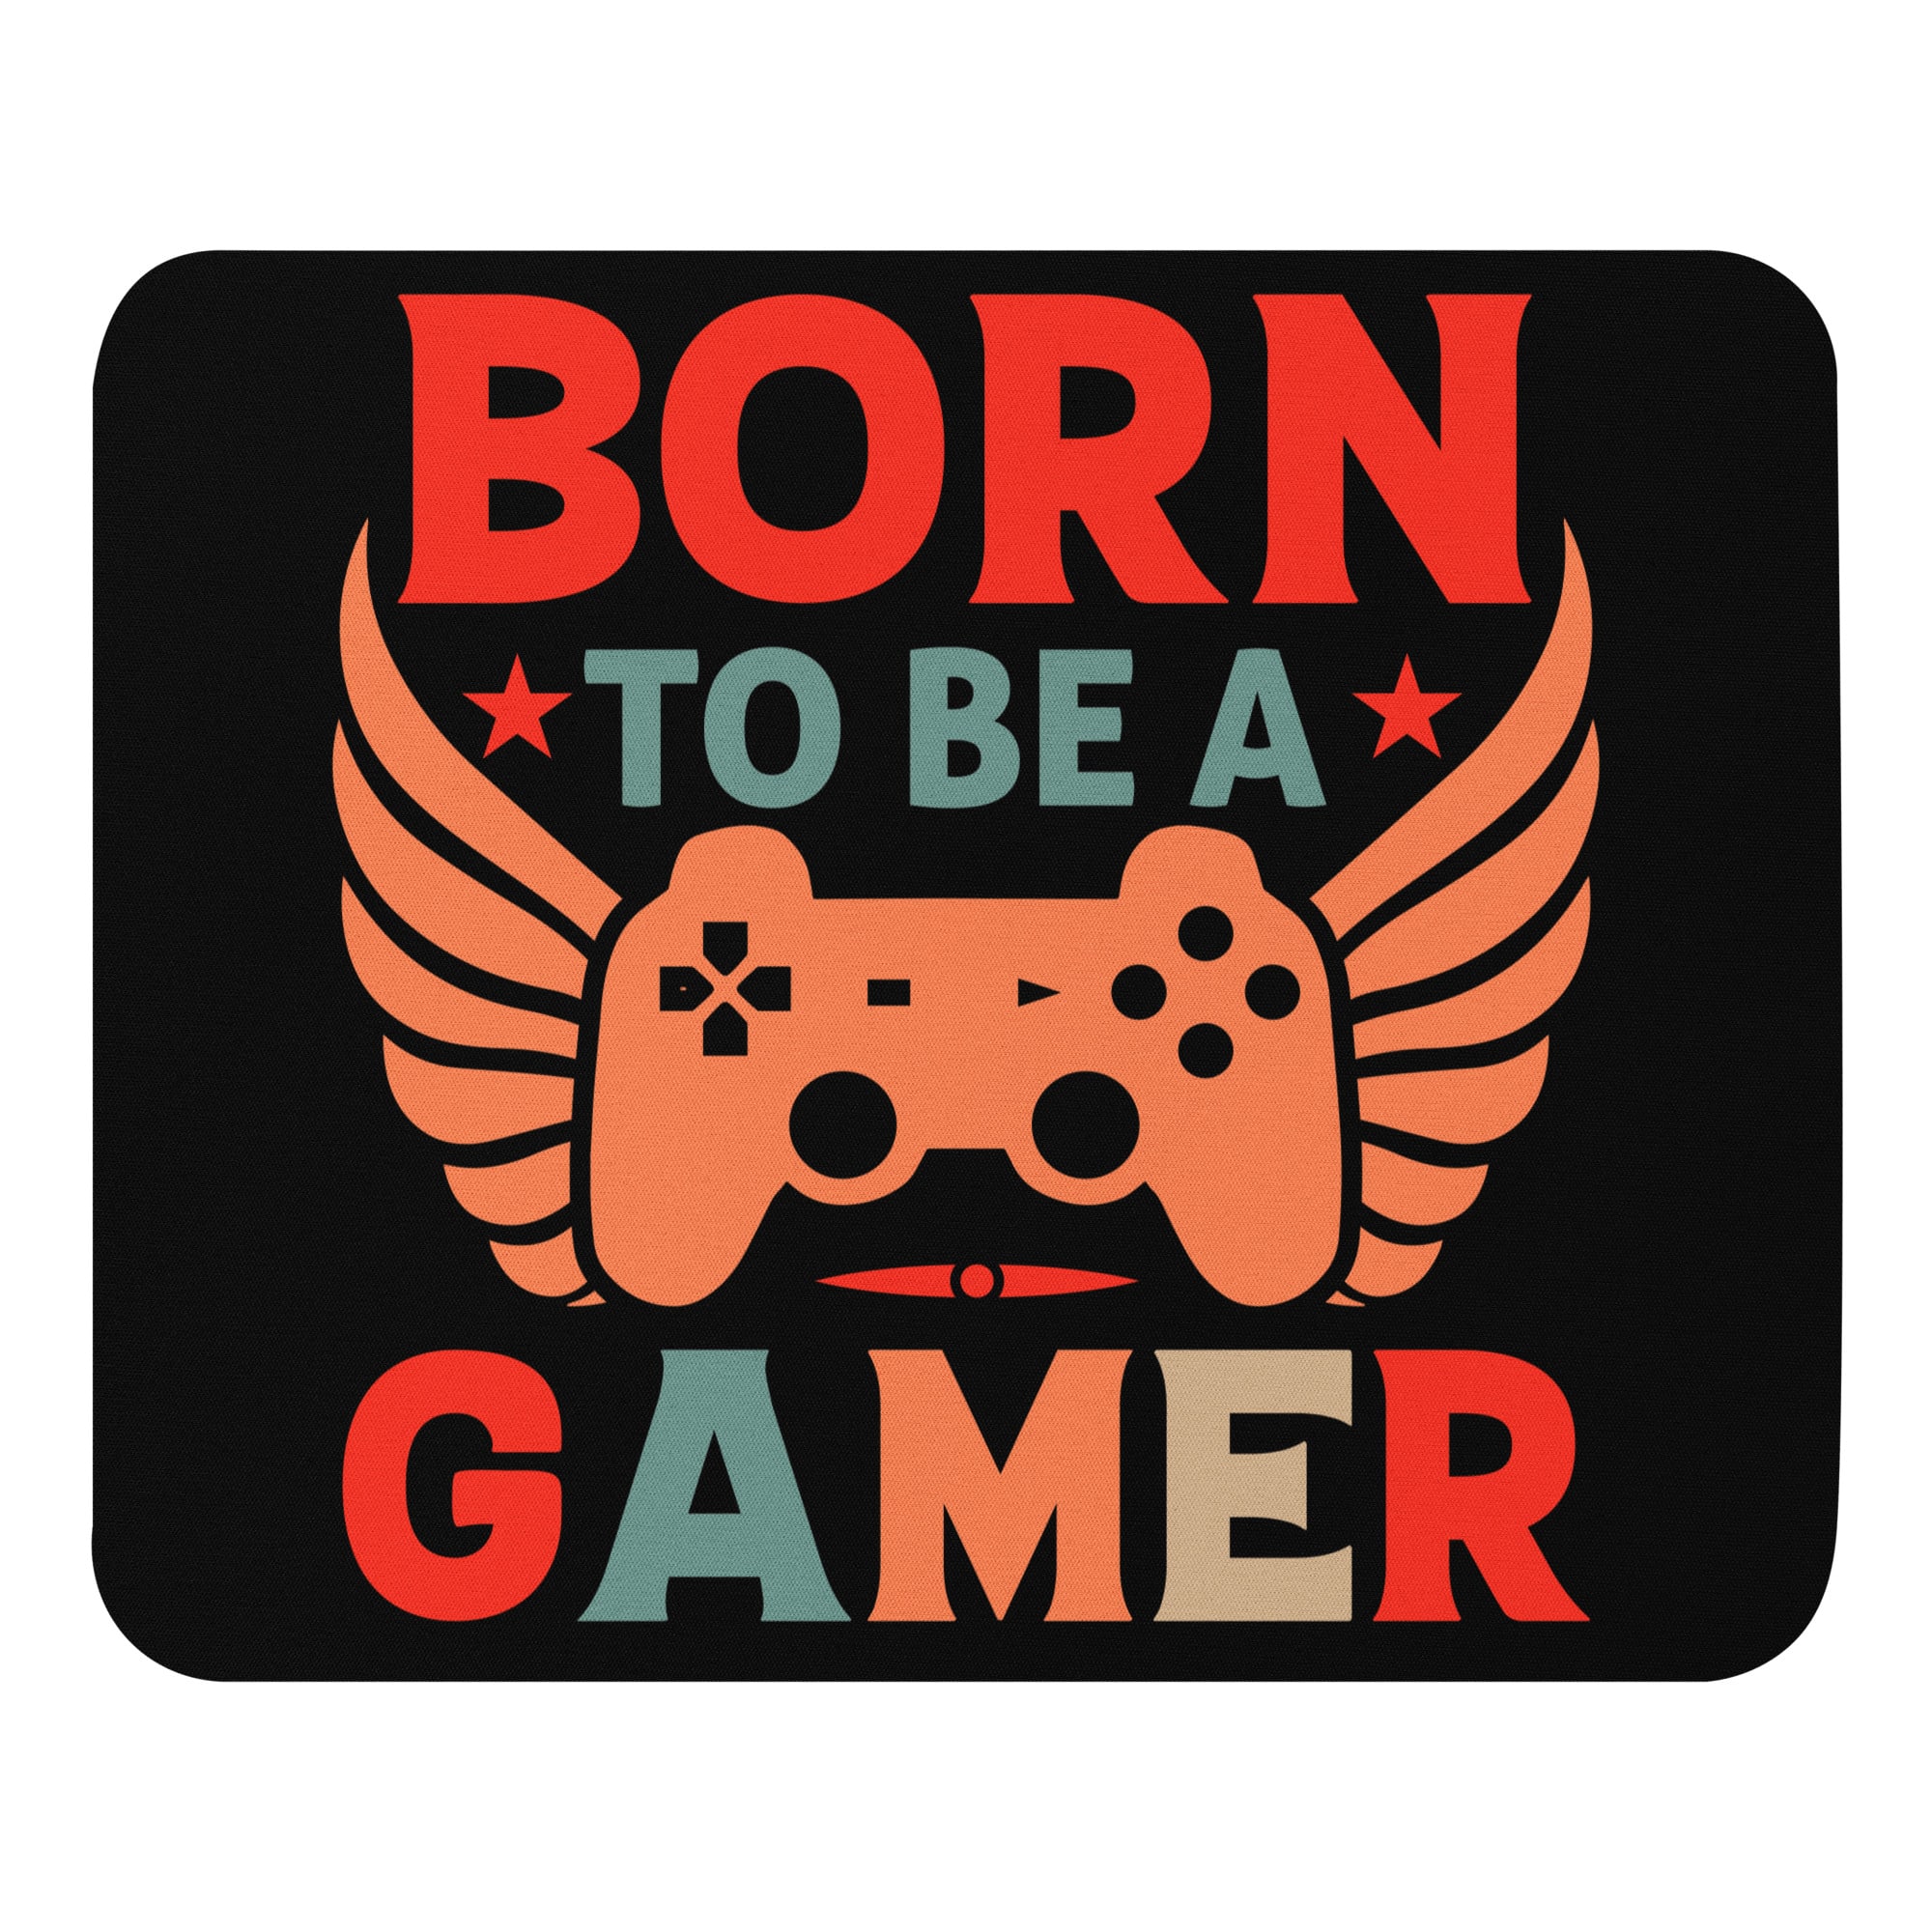 Born To Be A Gamer Mouse Pad Gaming mouse pad Gamer mouse mat Gaming desk accessories Custom gaming mouse pad Large gaming mouse pad Cool mouse pads for gamers Gaming setup essentials Ergonomic gaming mouse pad Personalized gaming mouse pad RGB gaming mouse pad Video game store Gaming merchandise Gaming accessories shop Online gaming store Video game shop near me Gaming console store PC gaming store Gaming gear shop Retro gaming shop Board game shop Anime merchandise Anime store online Japanese anime shop Anime figurines Manga shop Anime DVDs Anime accessories Anime apparel Anime collectibles Anime gifts